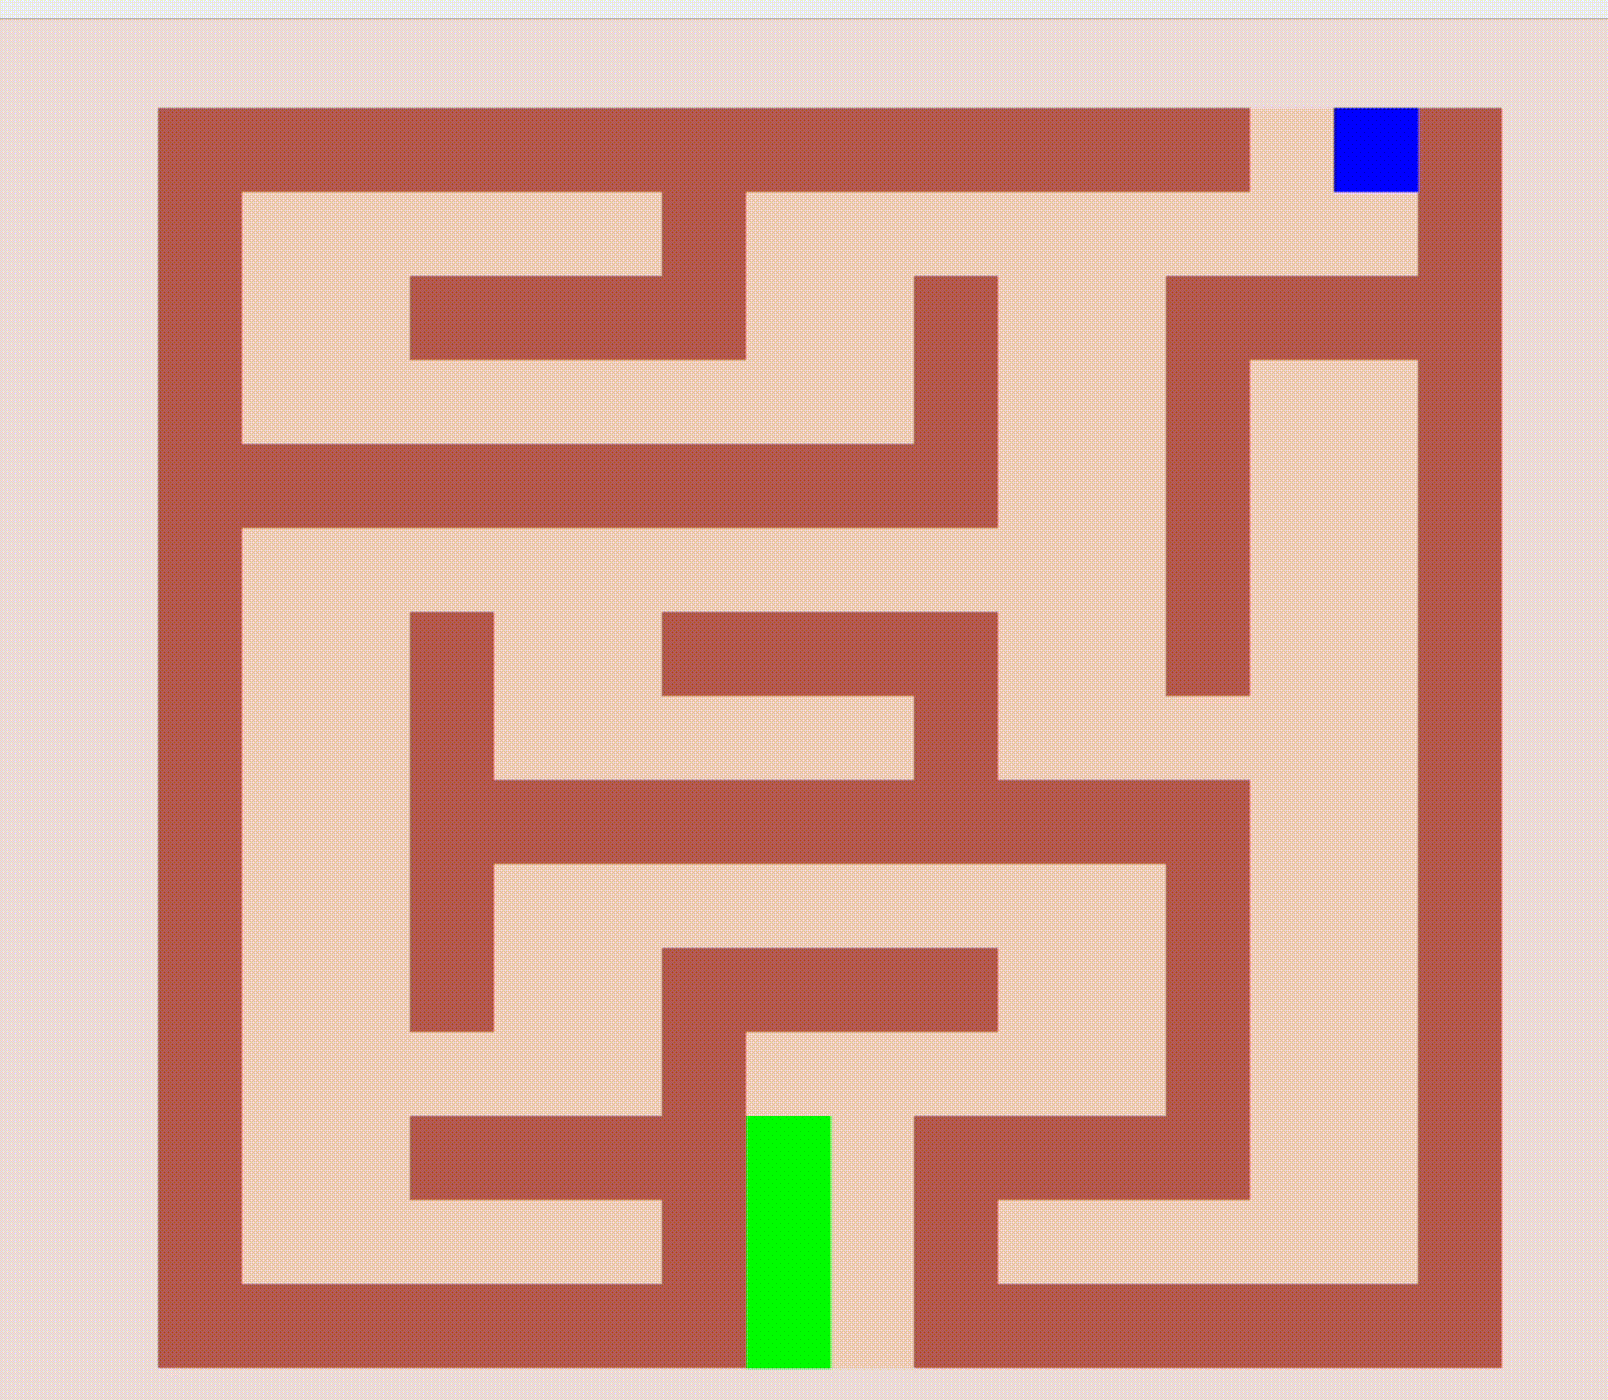 Using BFS to solve a maze